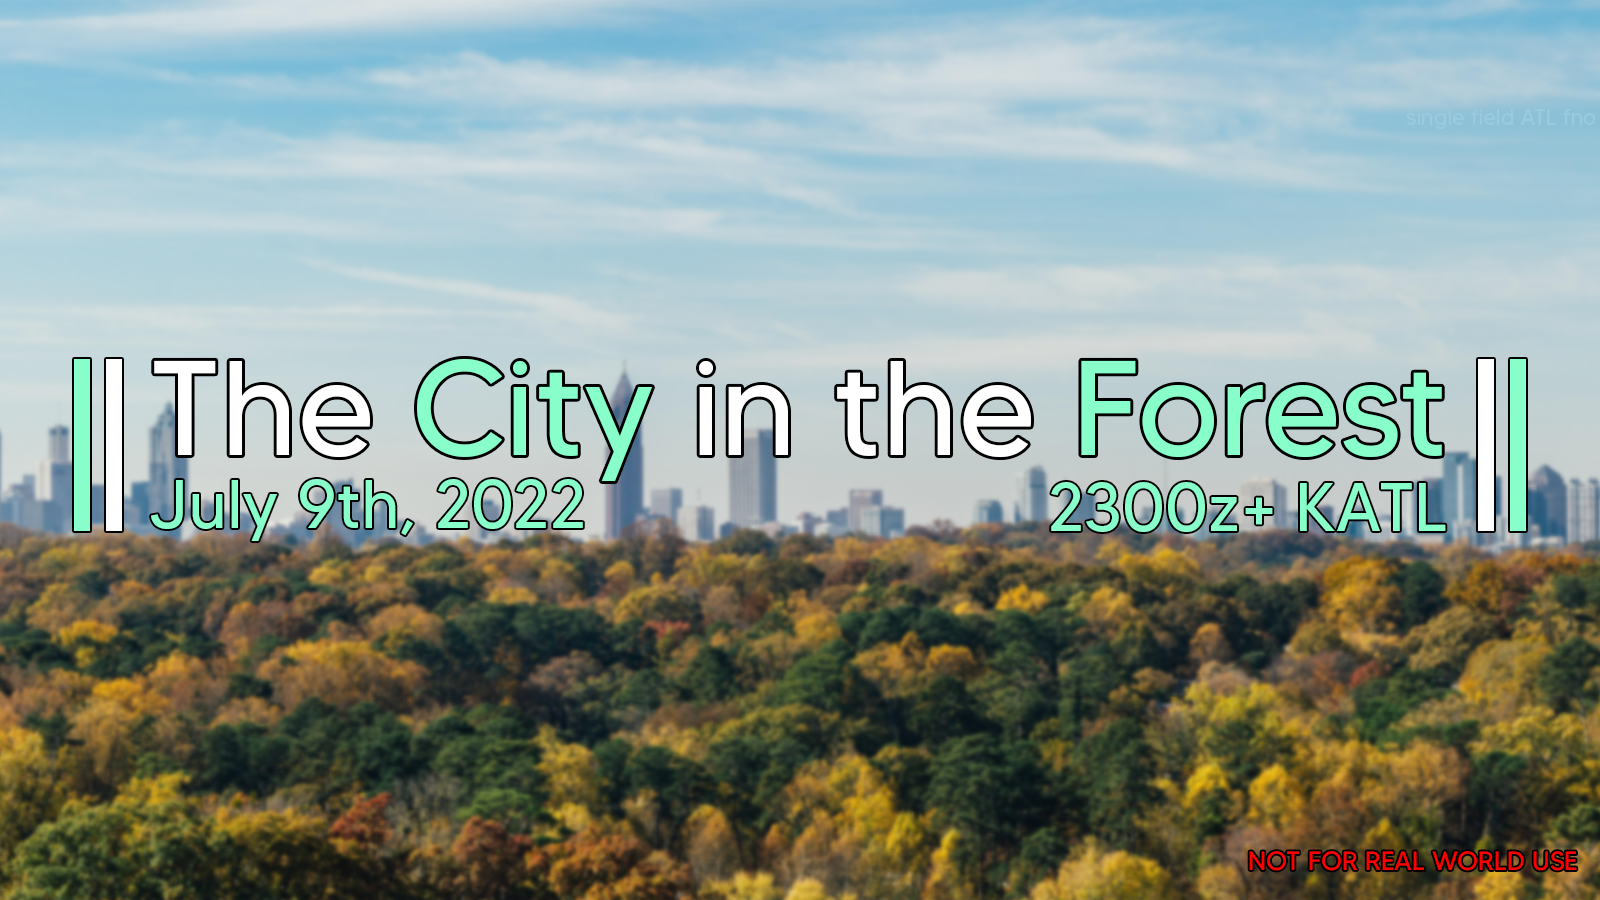 The City in the Forest